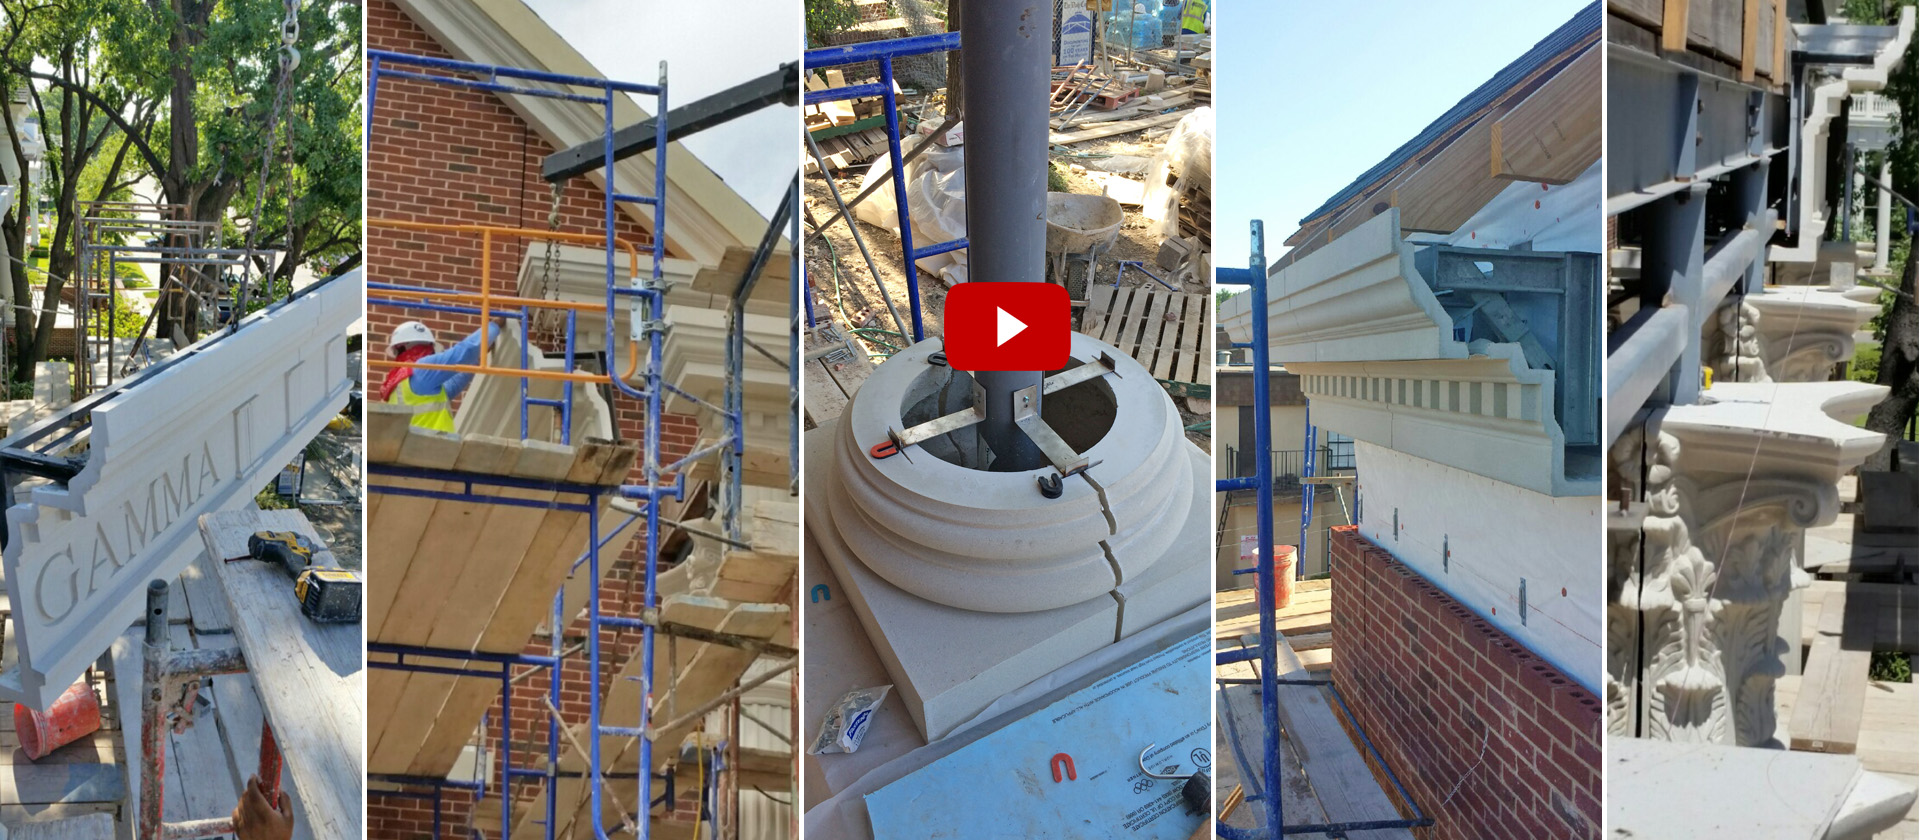 Architectural GFRC | Pre-engineered, Built-in Connections | Installation Support | Installation of GFRC Products at SMU Delta Gamma Sorority House